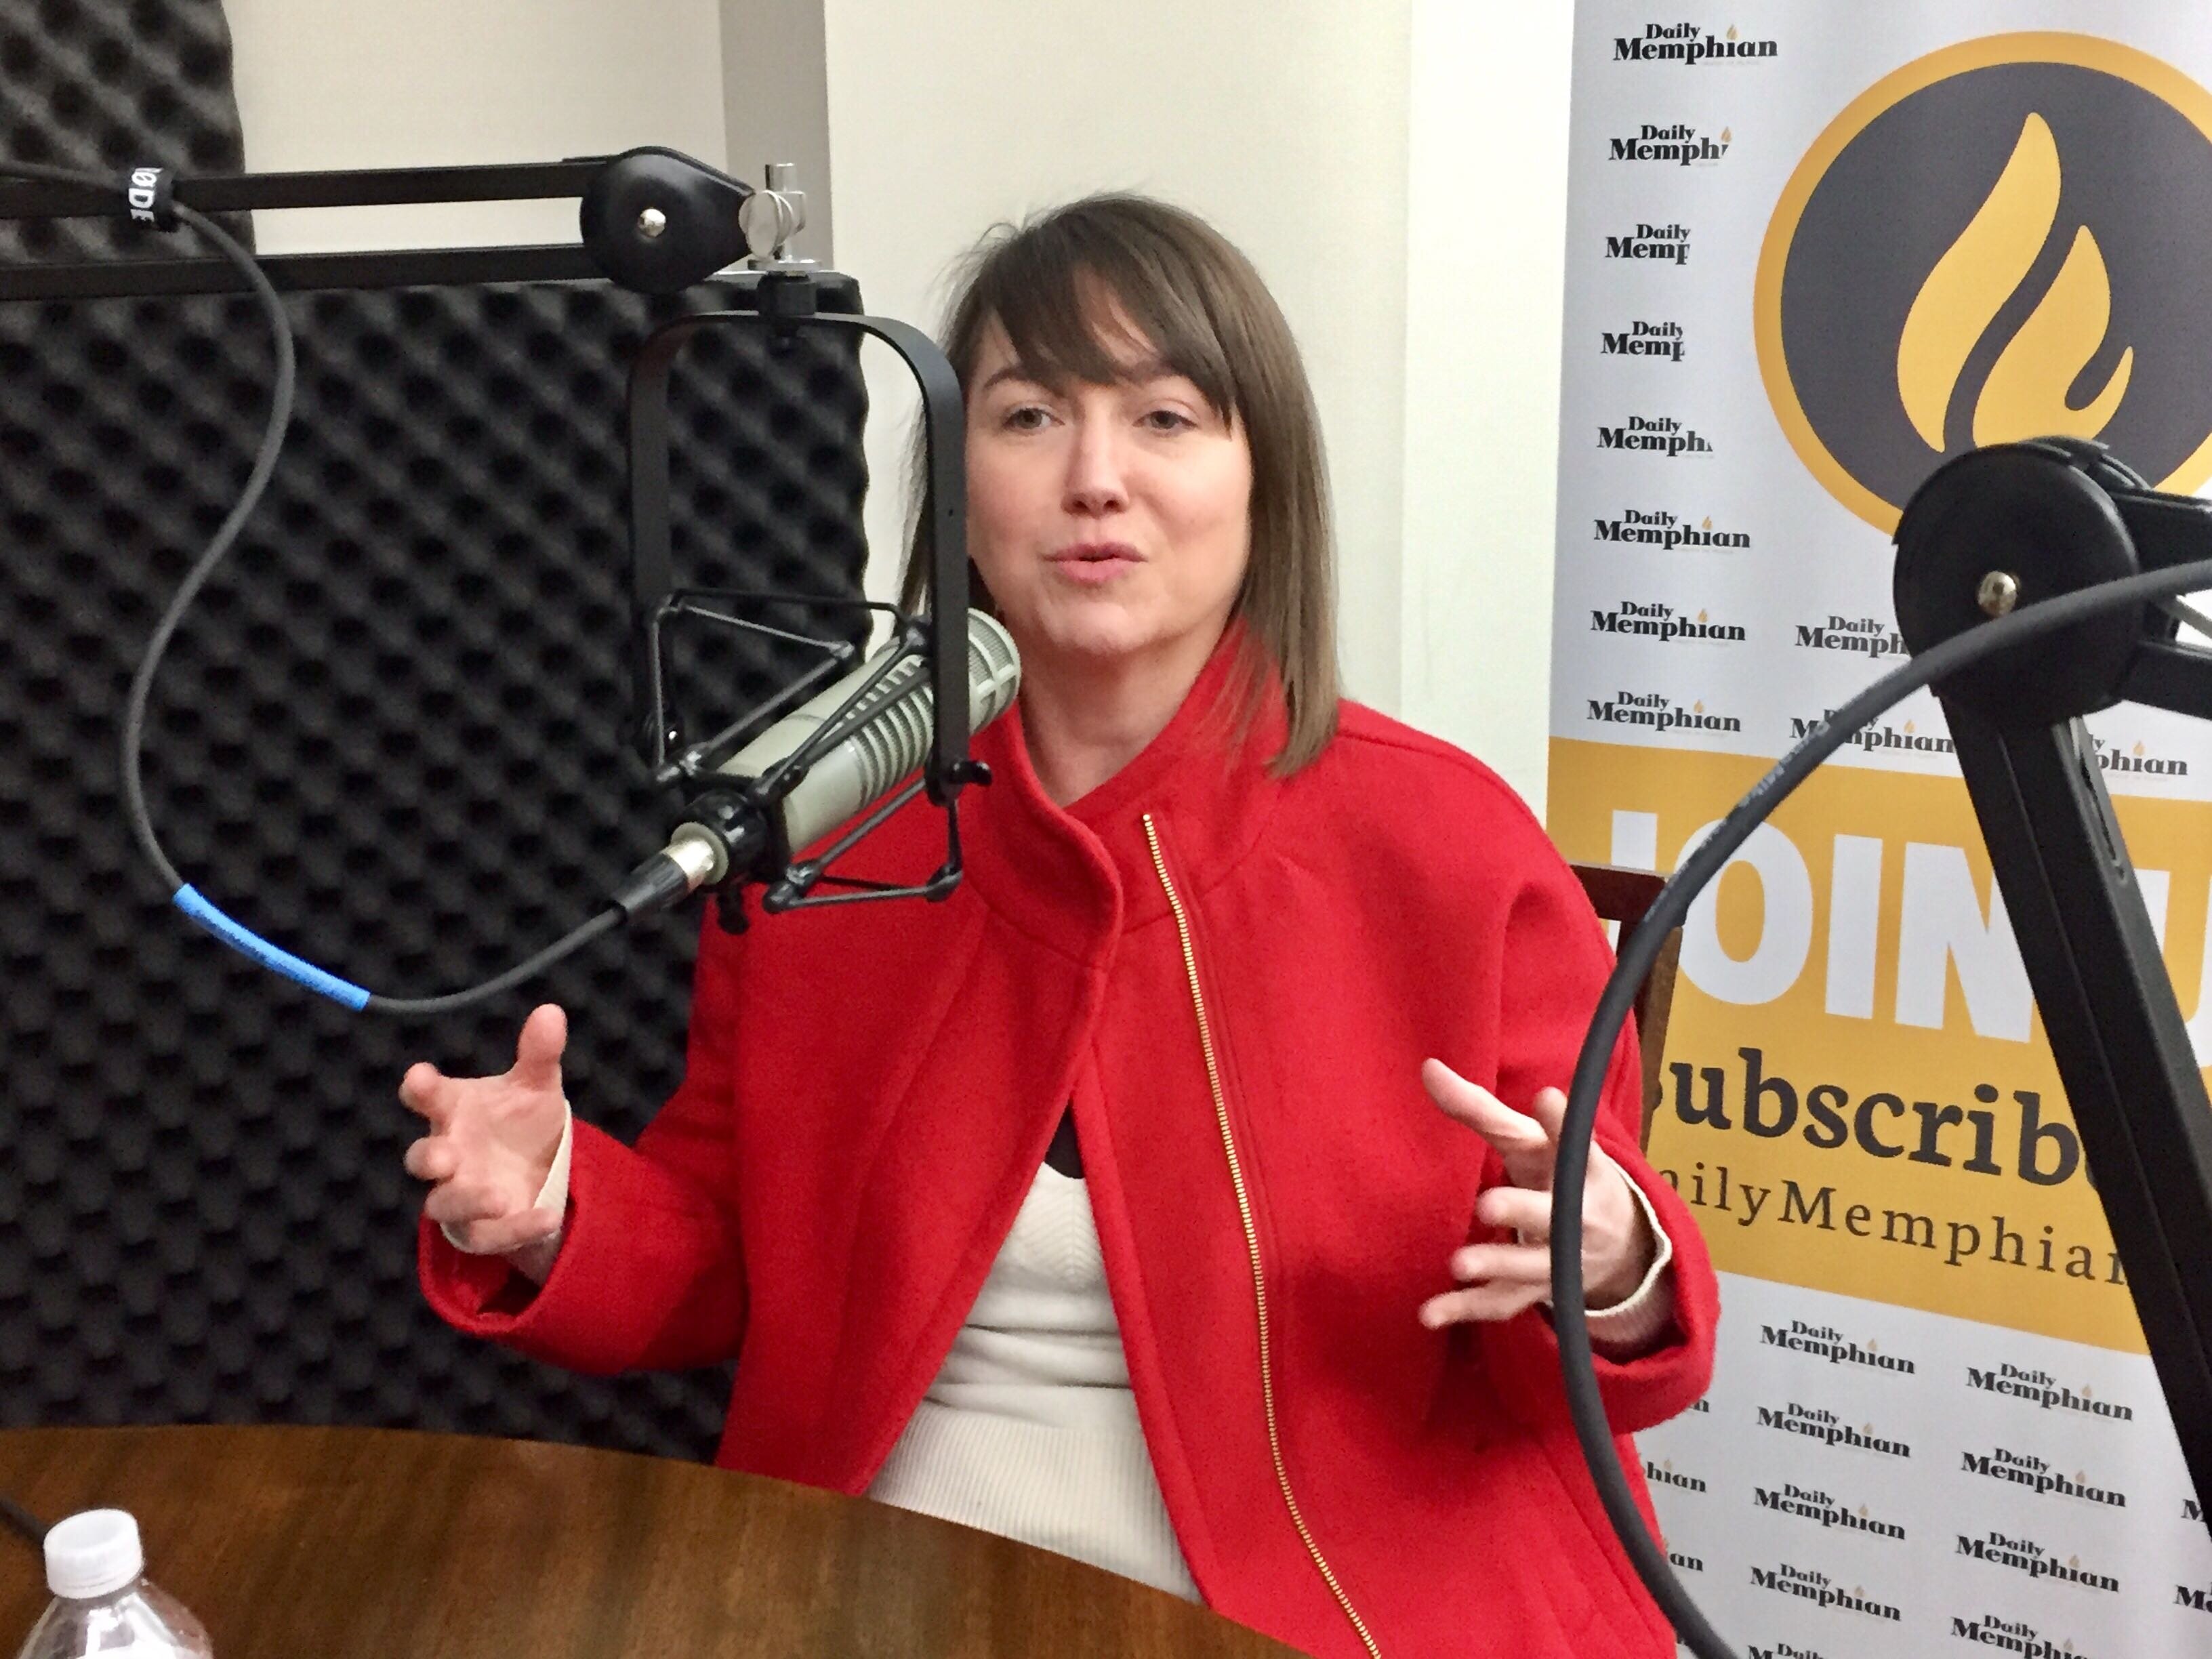 Anna Mullins with New Memphis discusses the upcoming TEDx Memphis event. It will be held on February 22 at the Concourse Theater. (Natalie Van Gundy)